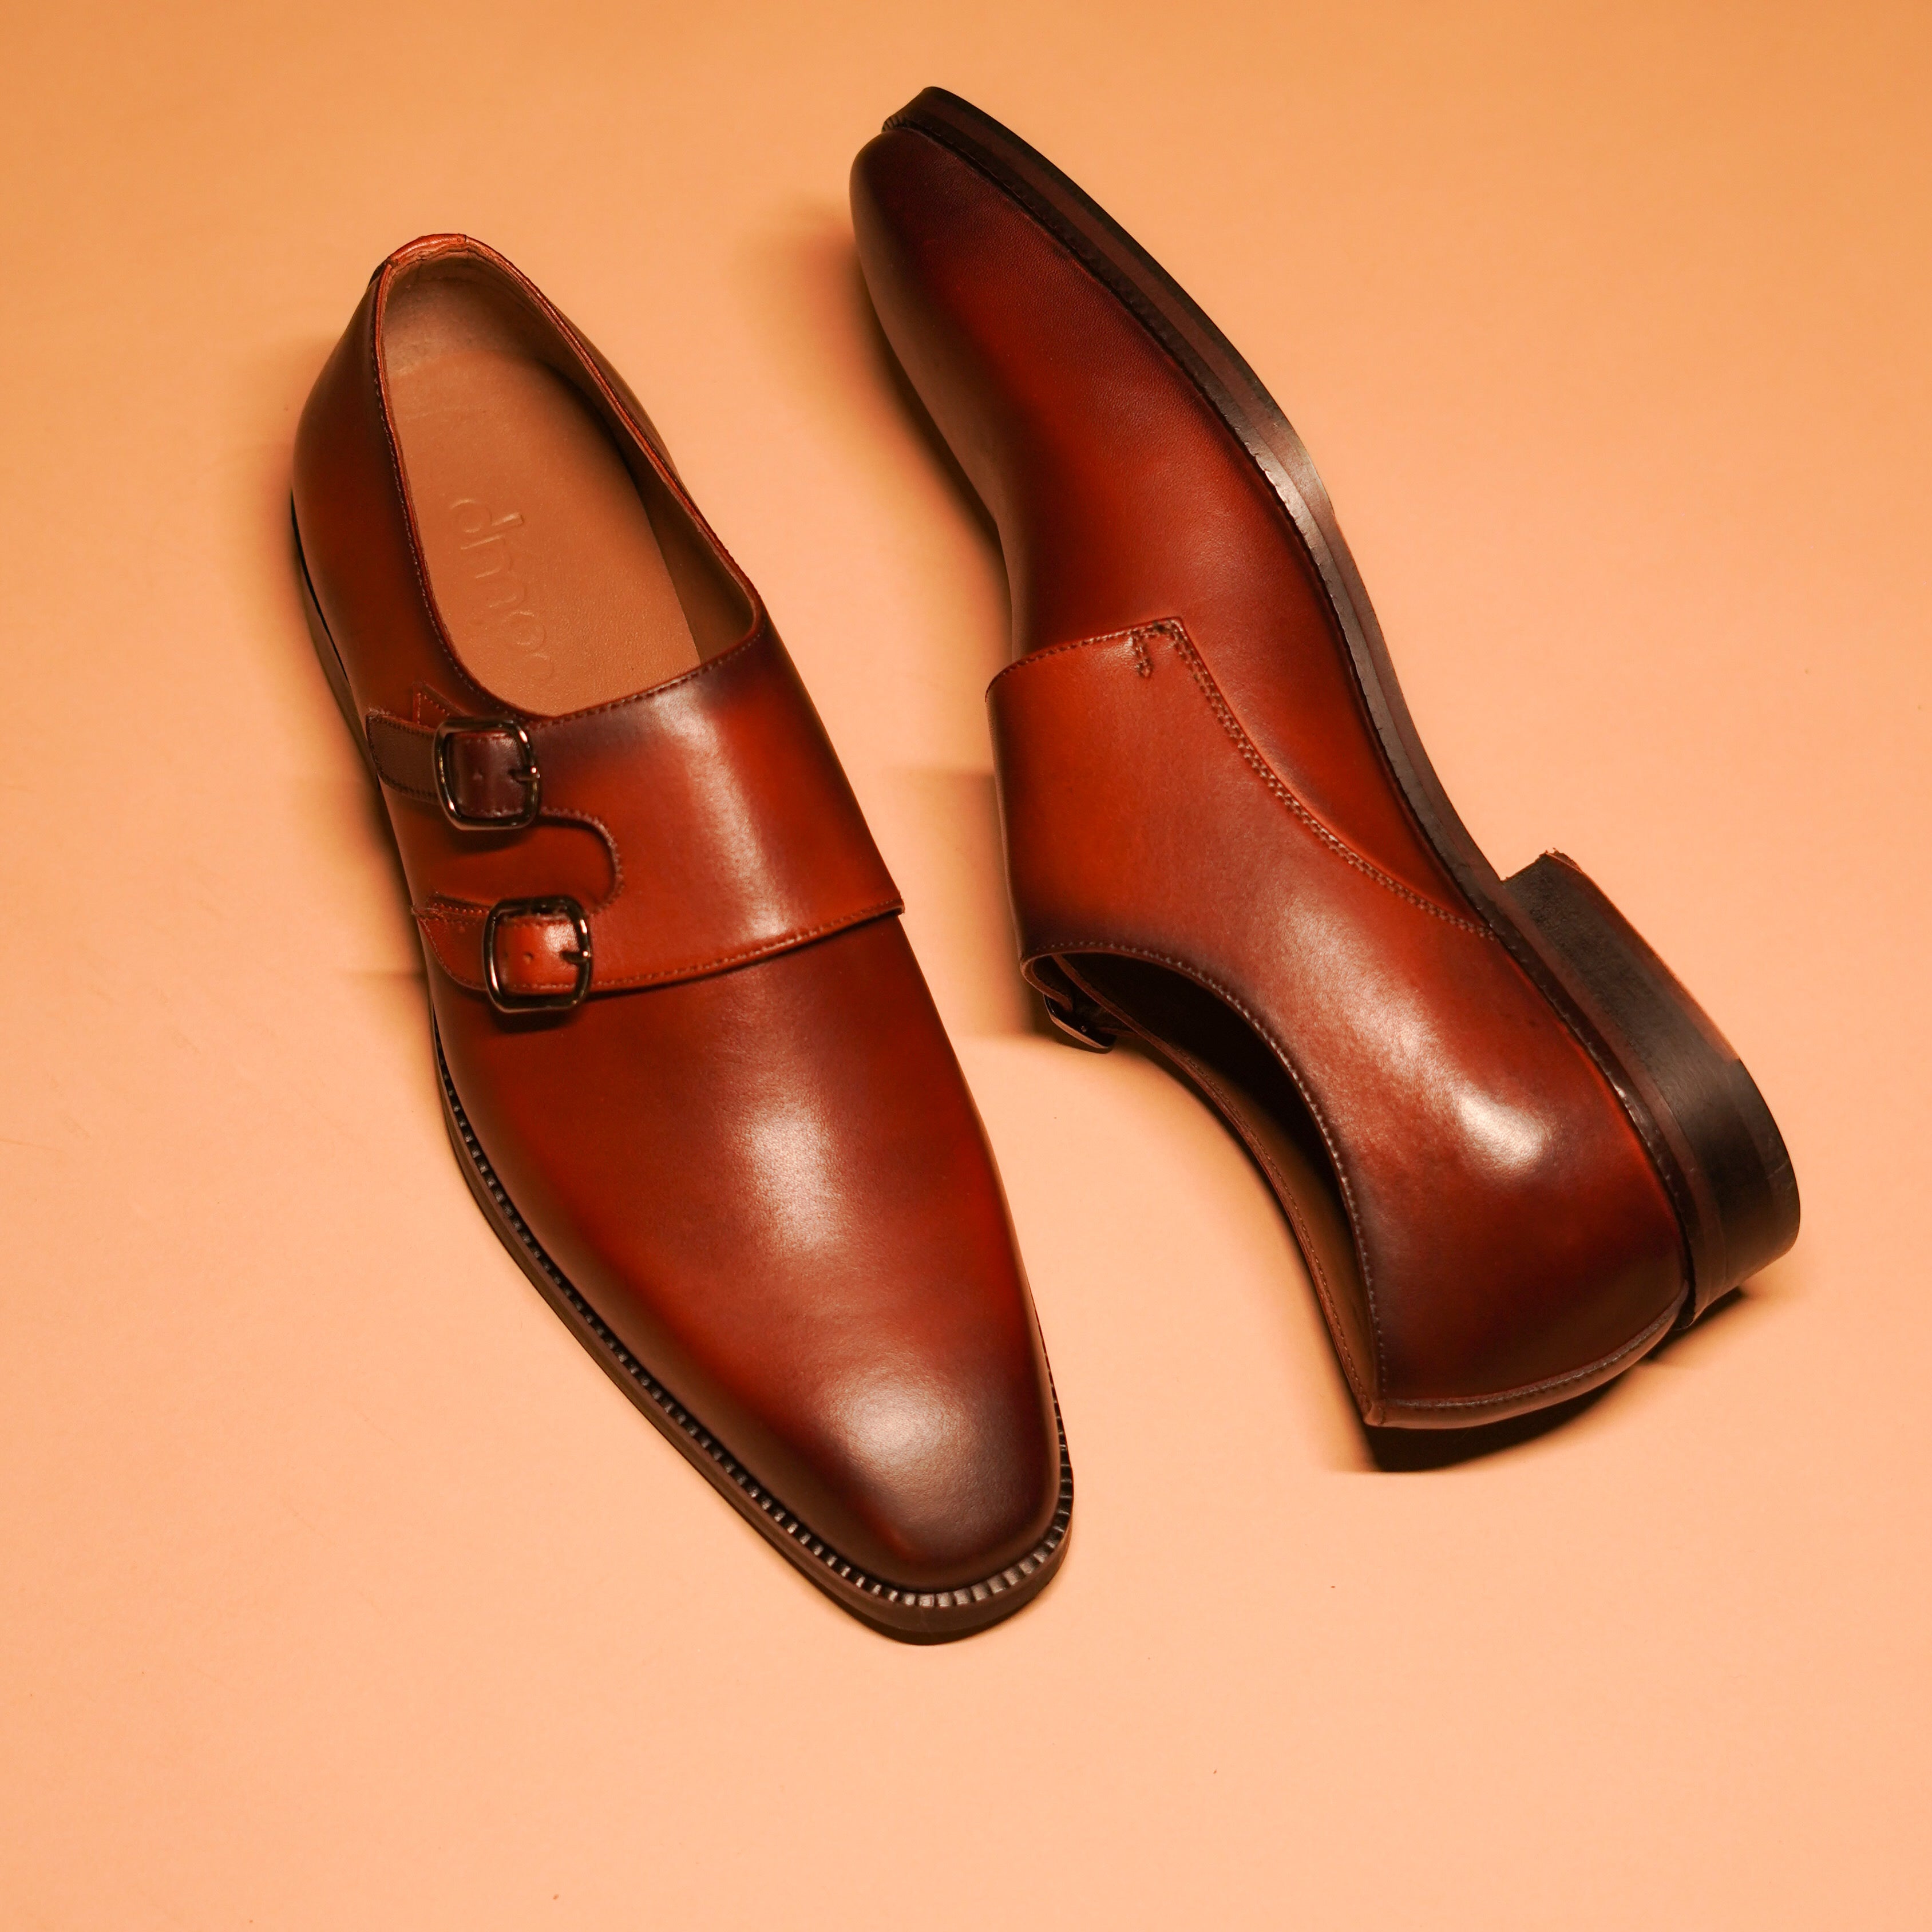 Belismo Marrone by DMODOT - Luxury double monk strap shoe with square toe and full-grain leather.